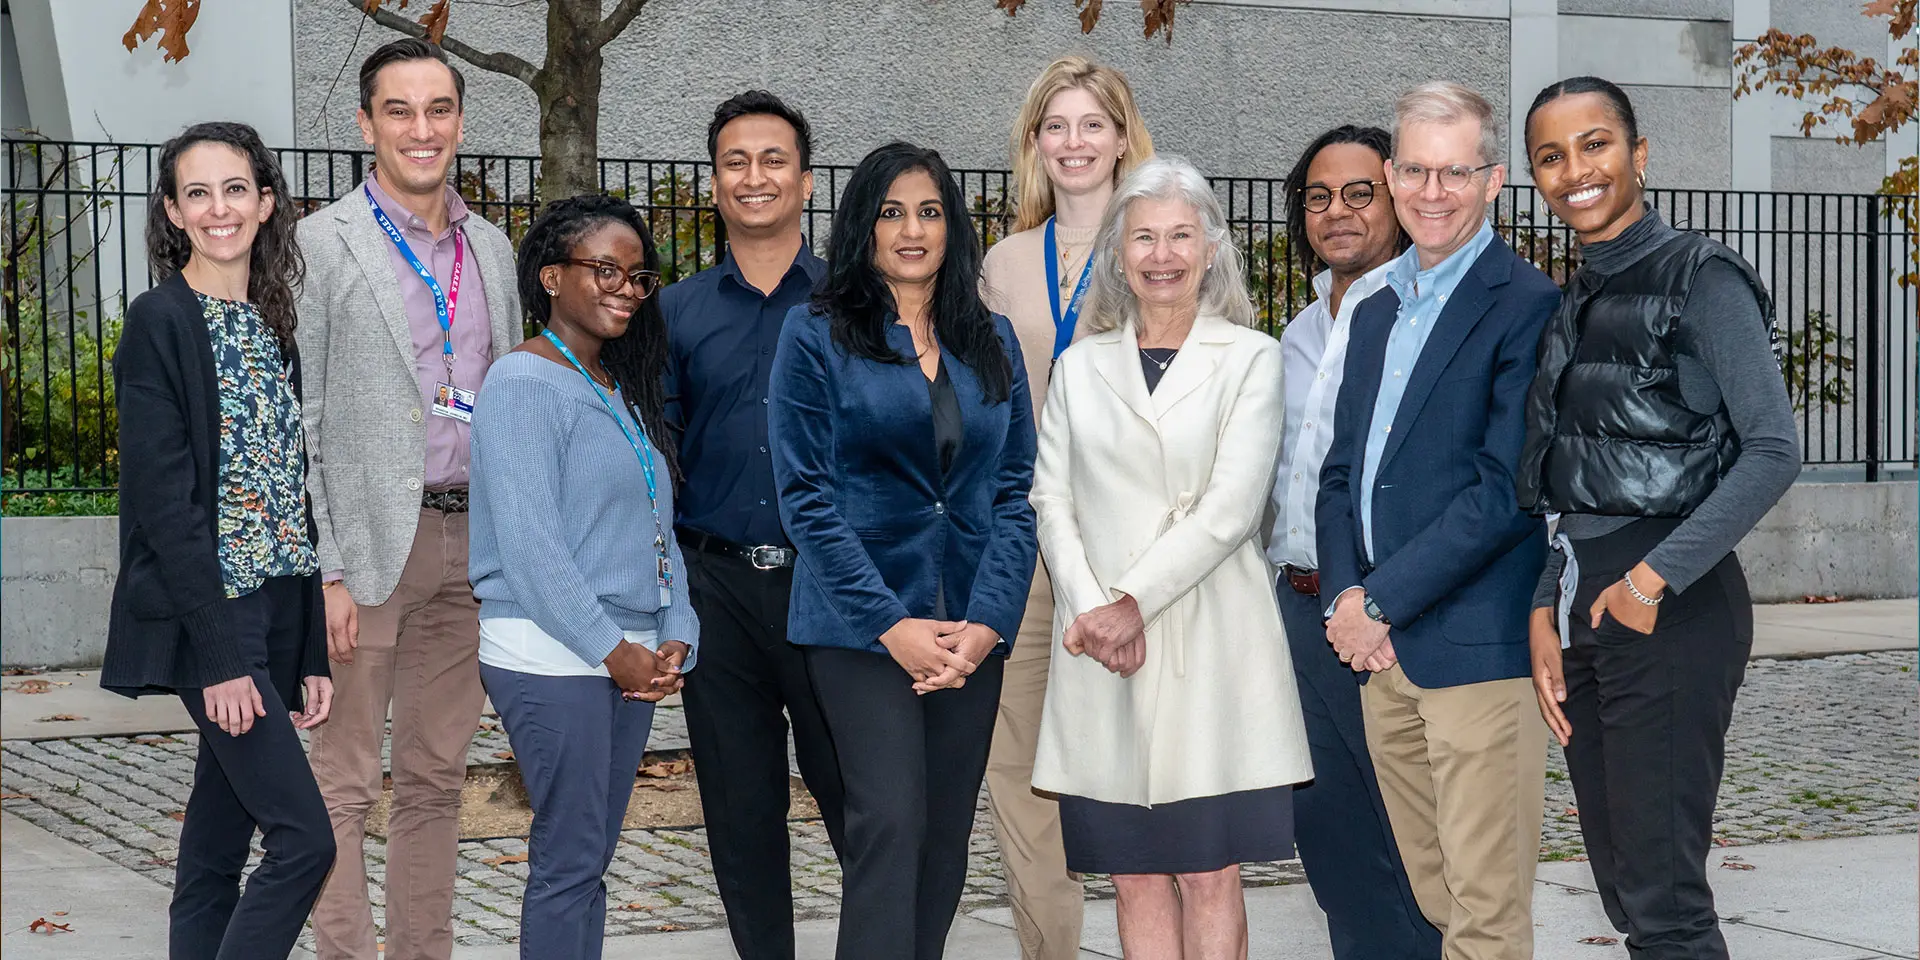 Psychiatry DEI Committee members at Mount Sinai
Morningside/West, from left to right: Aliza Grossberg, MD; Brandon Johnson, MD; Nana Amoh, PhD; Harshit Sharma, MD; Shilpa Taufique, PhD; Elizabeth Kern, MD; Dolores Malaspina, MD, MS, MSPH; Randolph Scott-Mclaughlin, PhD; Paul Rosenfield, MD; and Chanelle Ramsubick, MD



